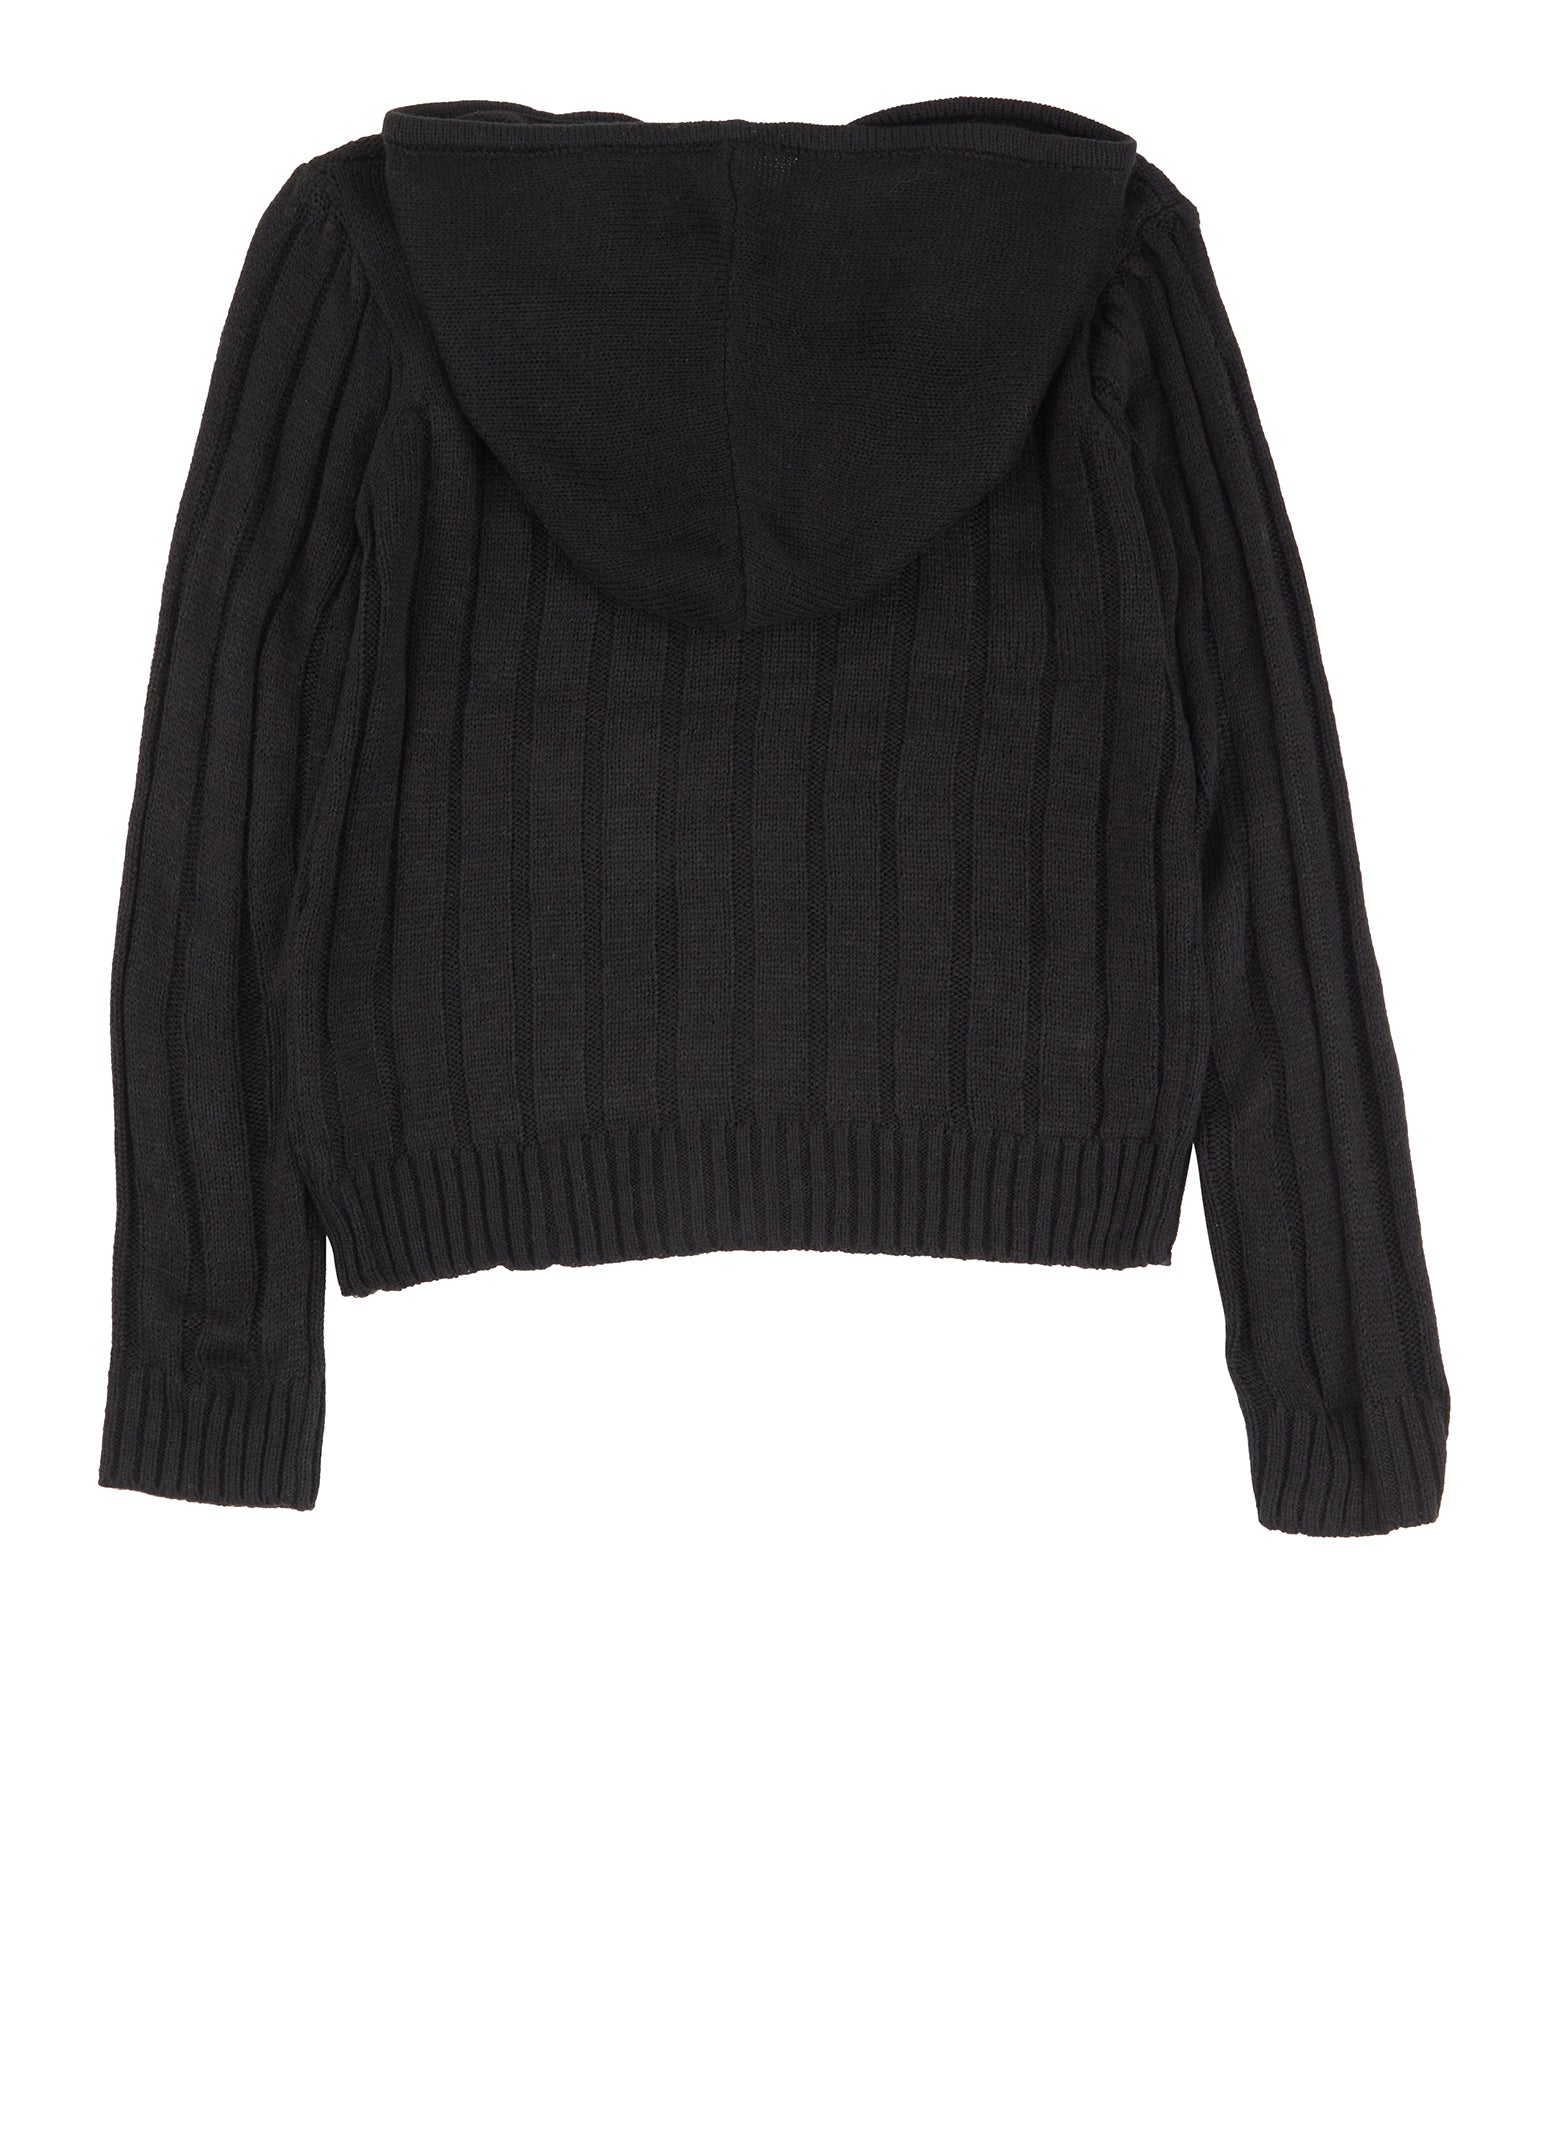 Girls Cable Knit Hooded Zip Front Sweater - Black